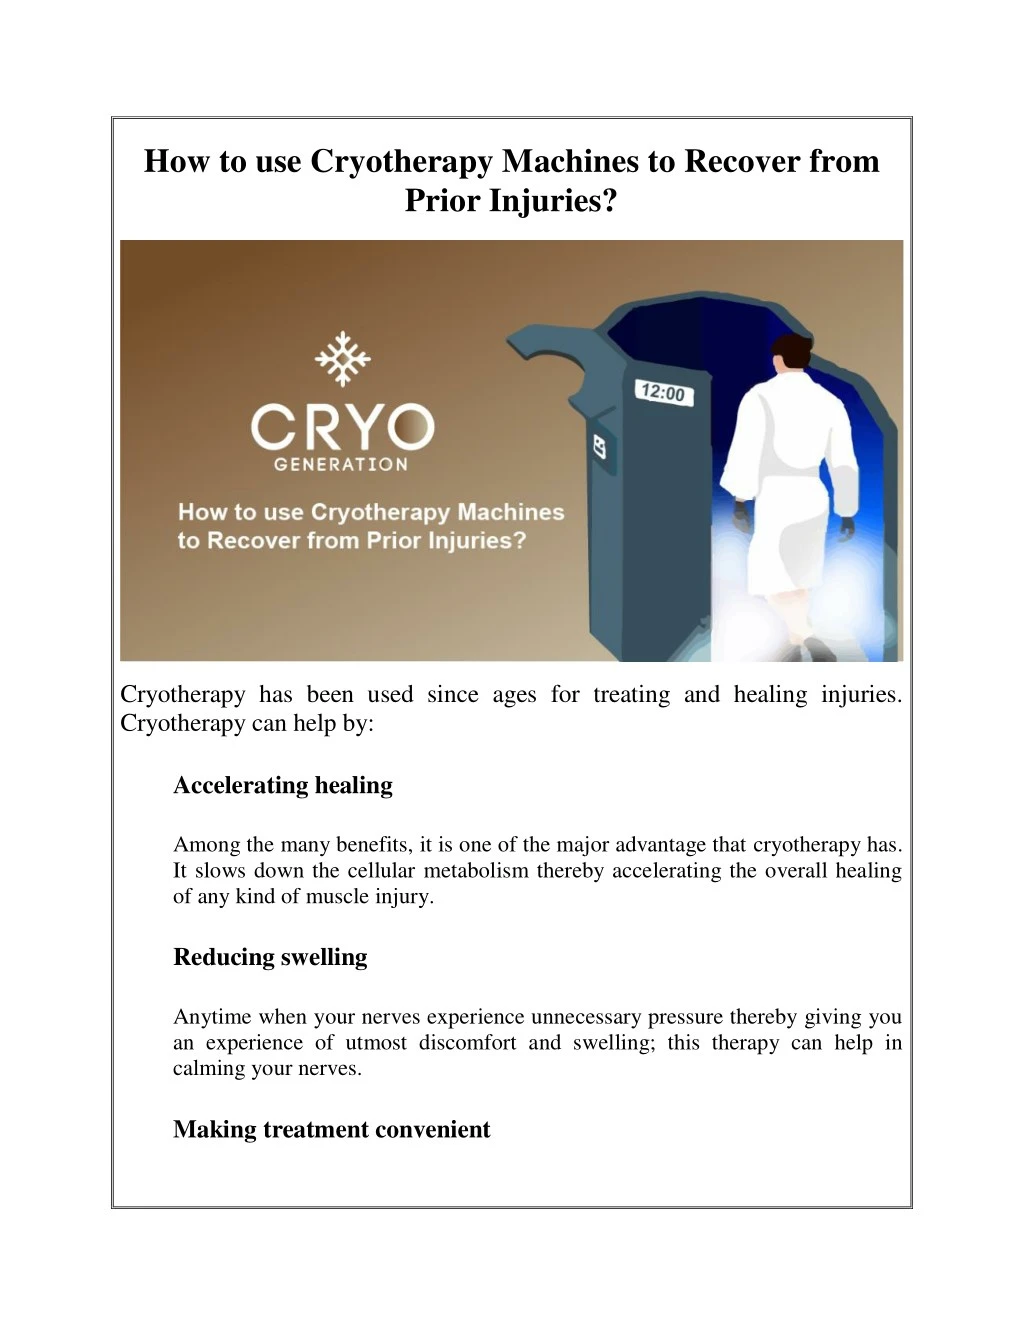 how to use cryotherapy machines to recover from